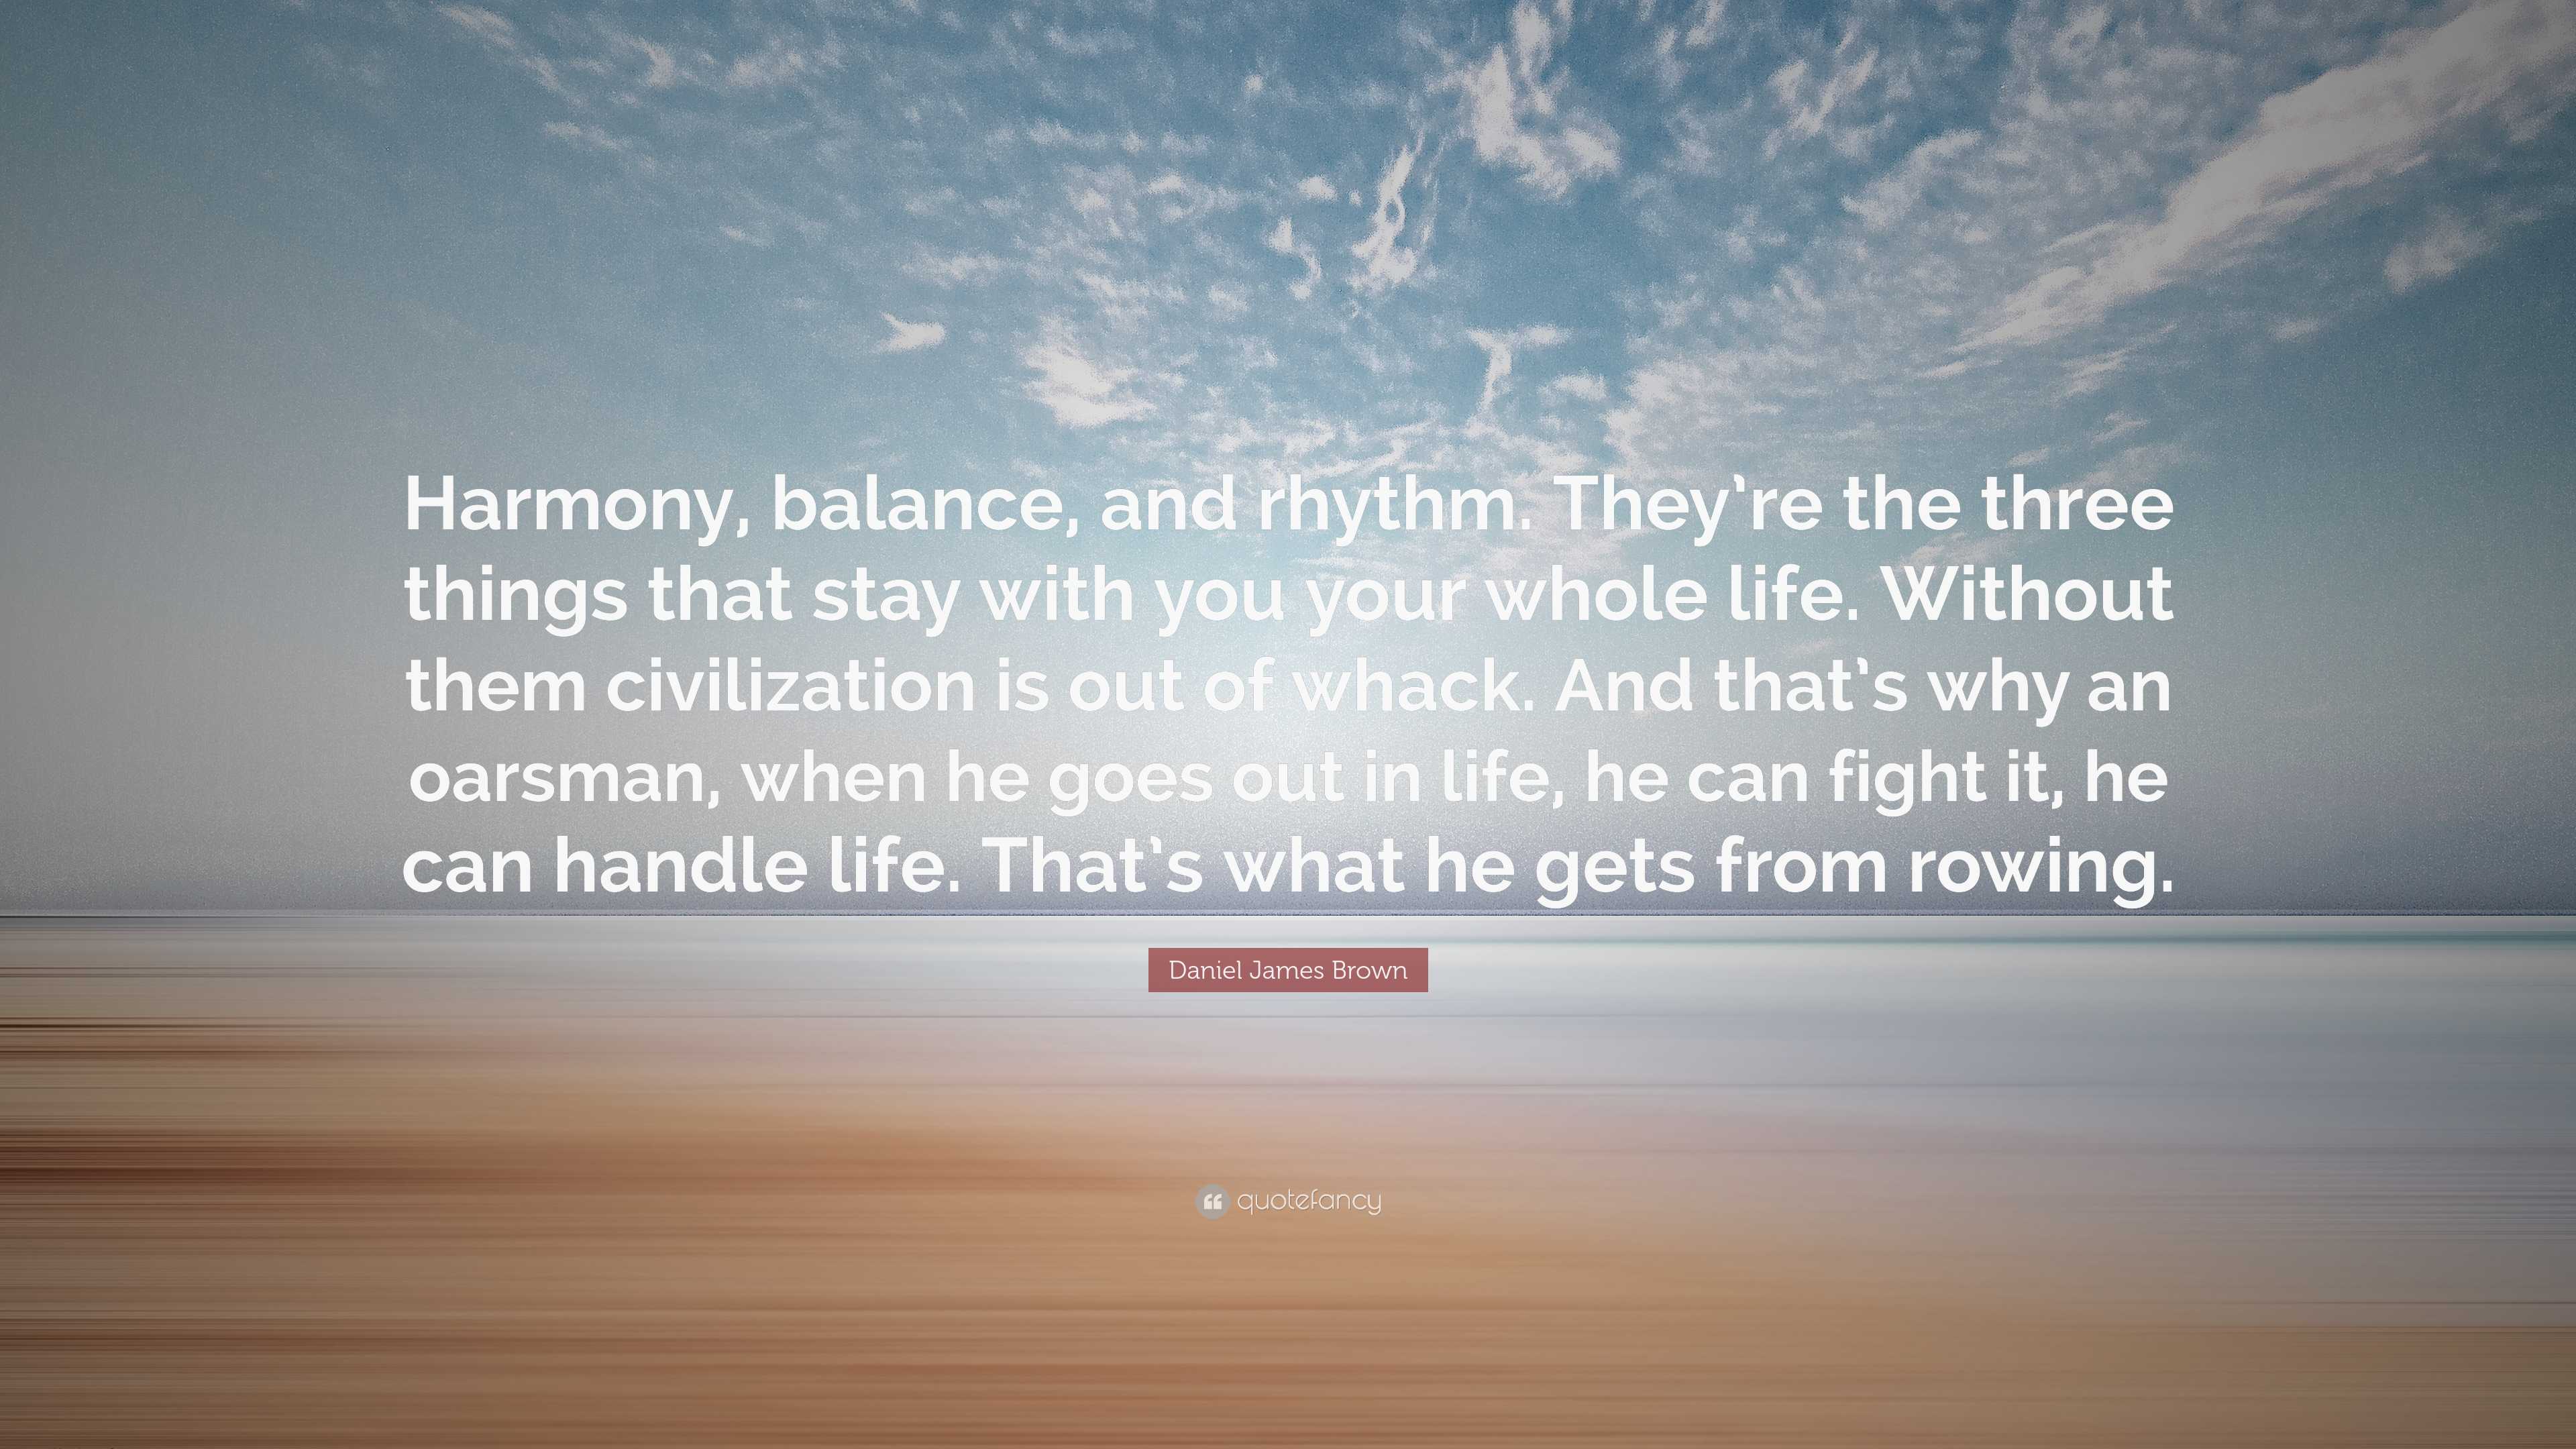 Daniel James Brown Quote: “Harmony, balance, and rhythm. They're the three  things that stay with you your whole life. Without them civilization is ”